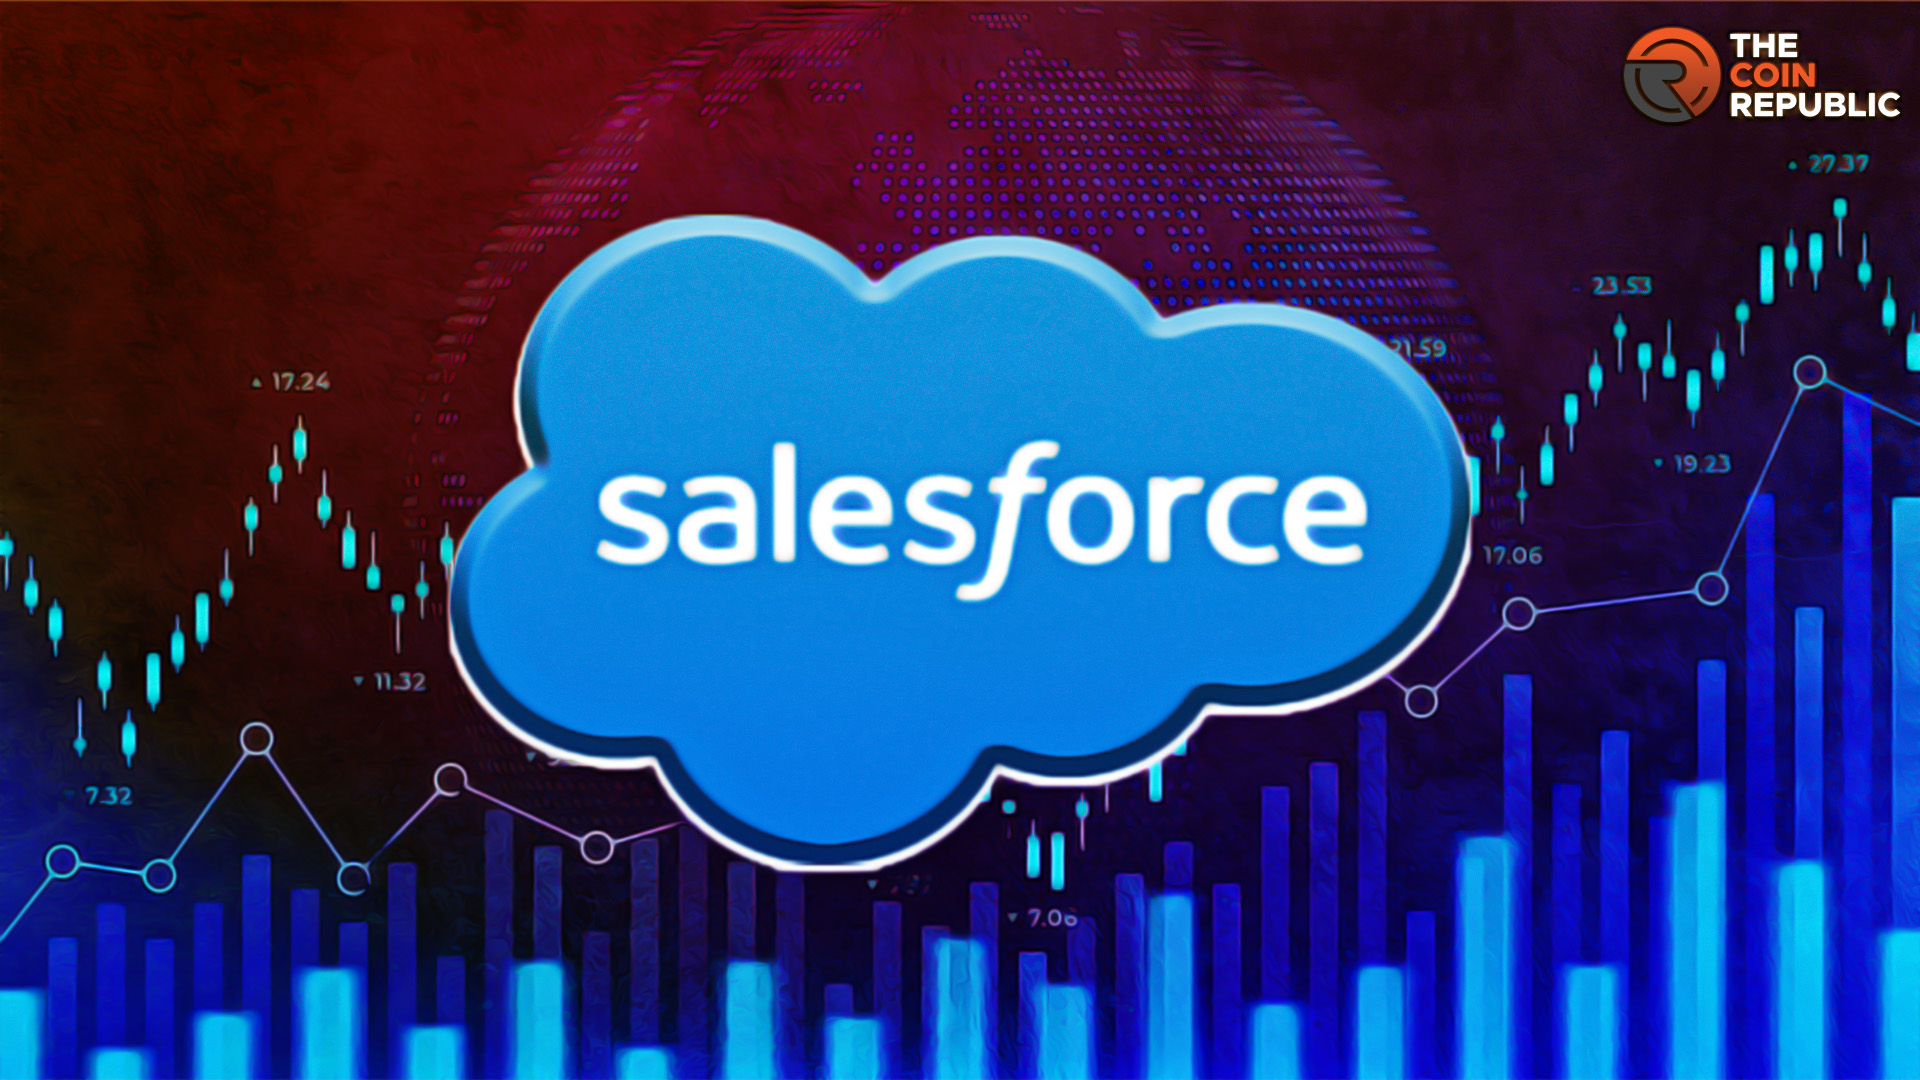 Salesforce Inc. (CRM Stock): How Long Can it Leverage AI?